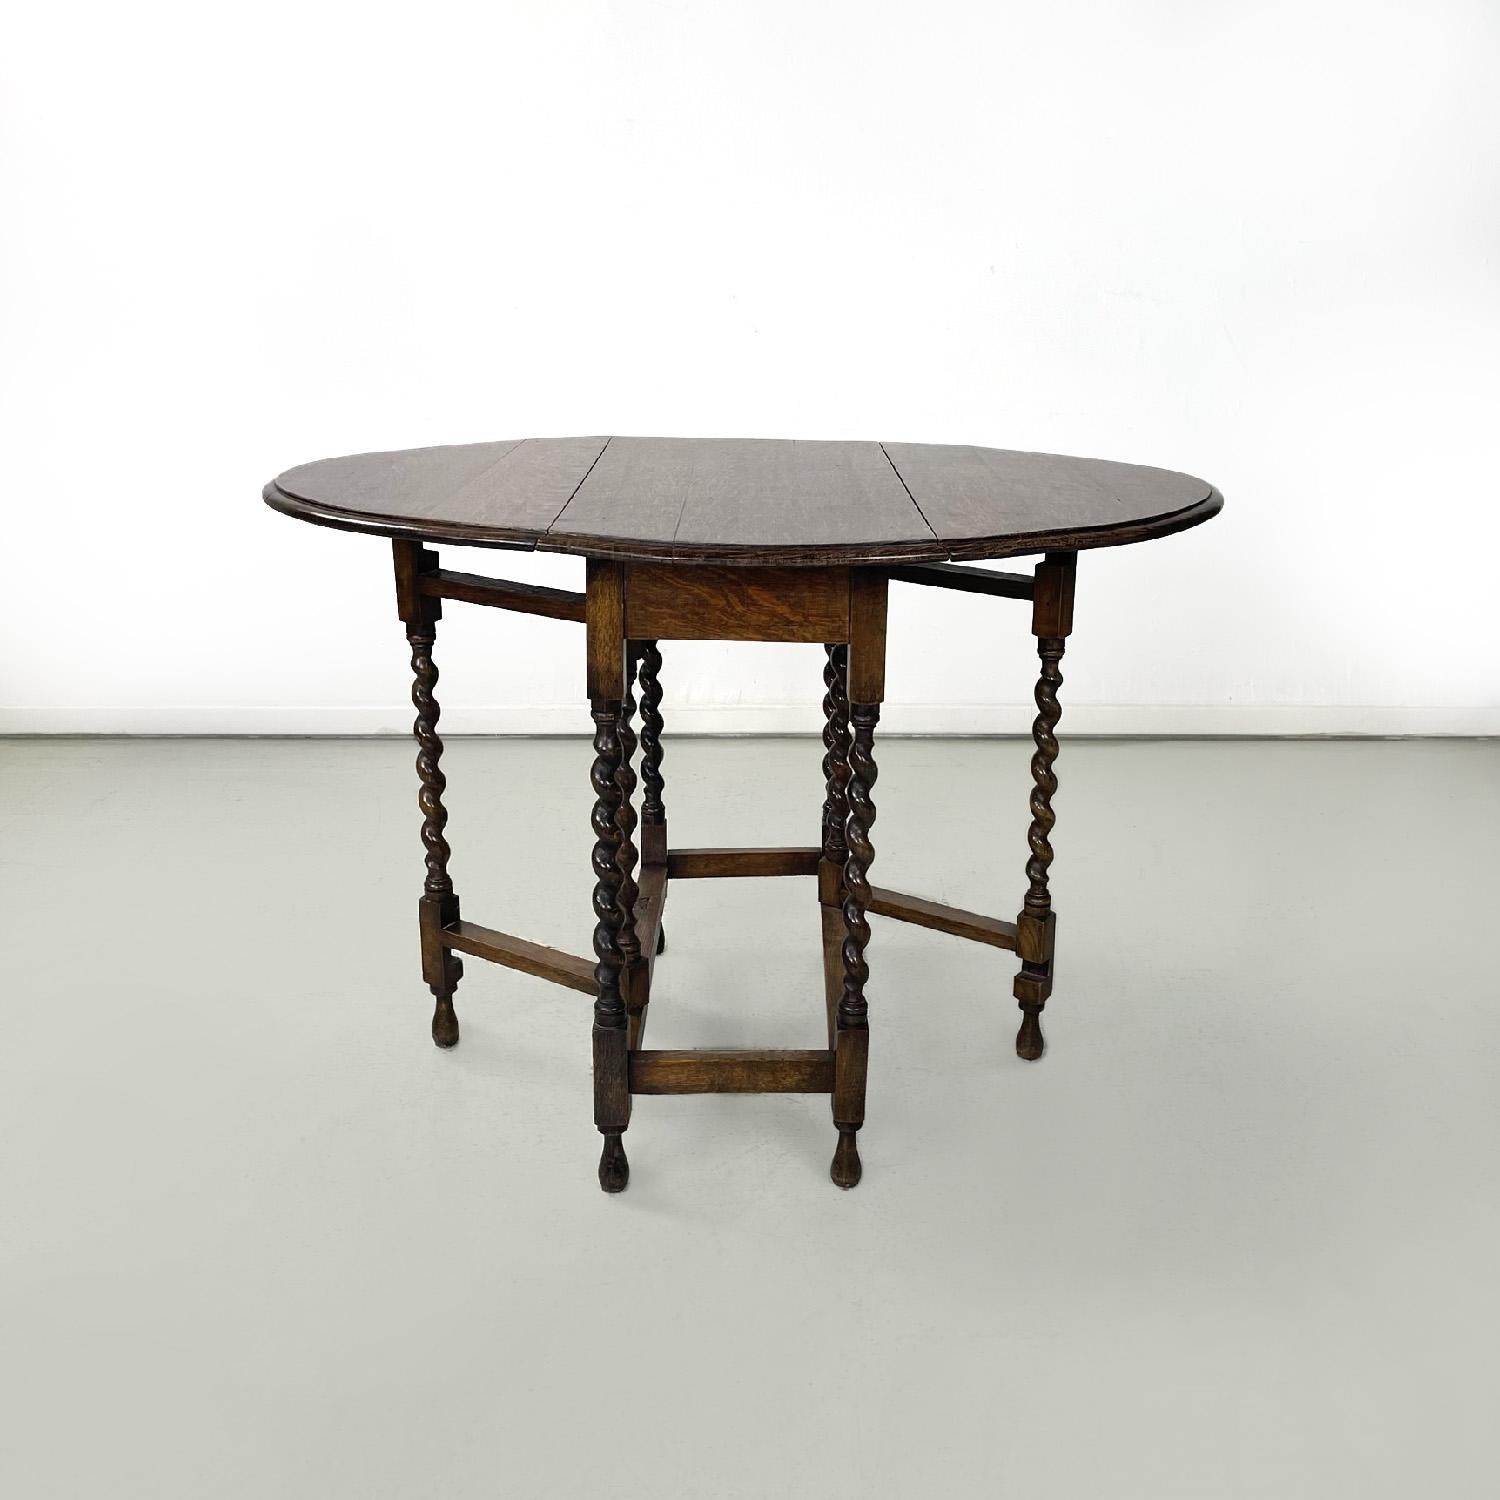 Italian wooden coffee or service table with two folding tops, 1900s
Coffee or service table made entirely of wood. It has a fixed rectangular central top, which corresponds to two lateral semicircular folding doors, so that once both are opened the